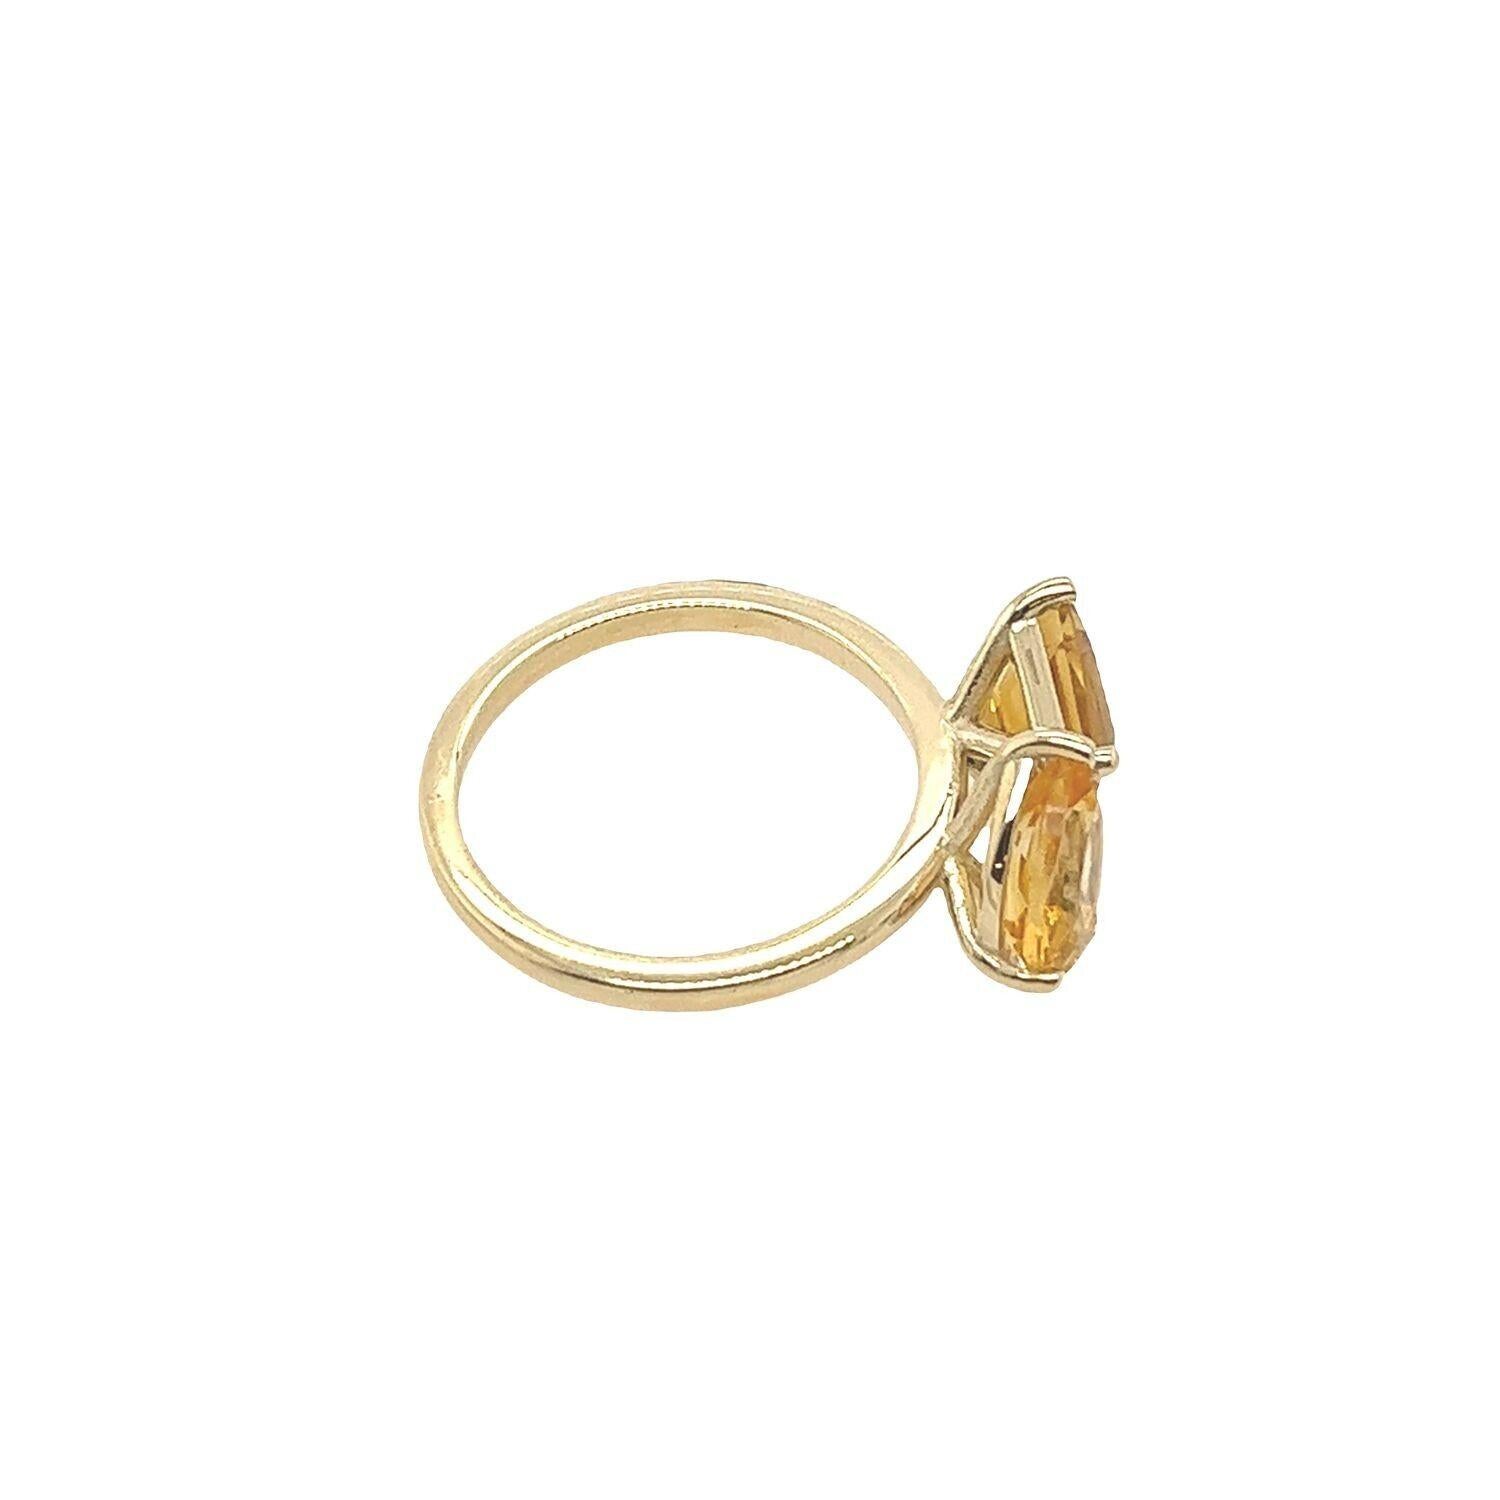 The Toi et Moi Golden Citrine 2.74ct Ring in 14ct Yellow Gold For Sale 1